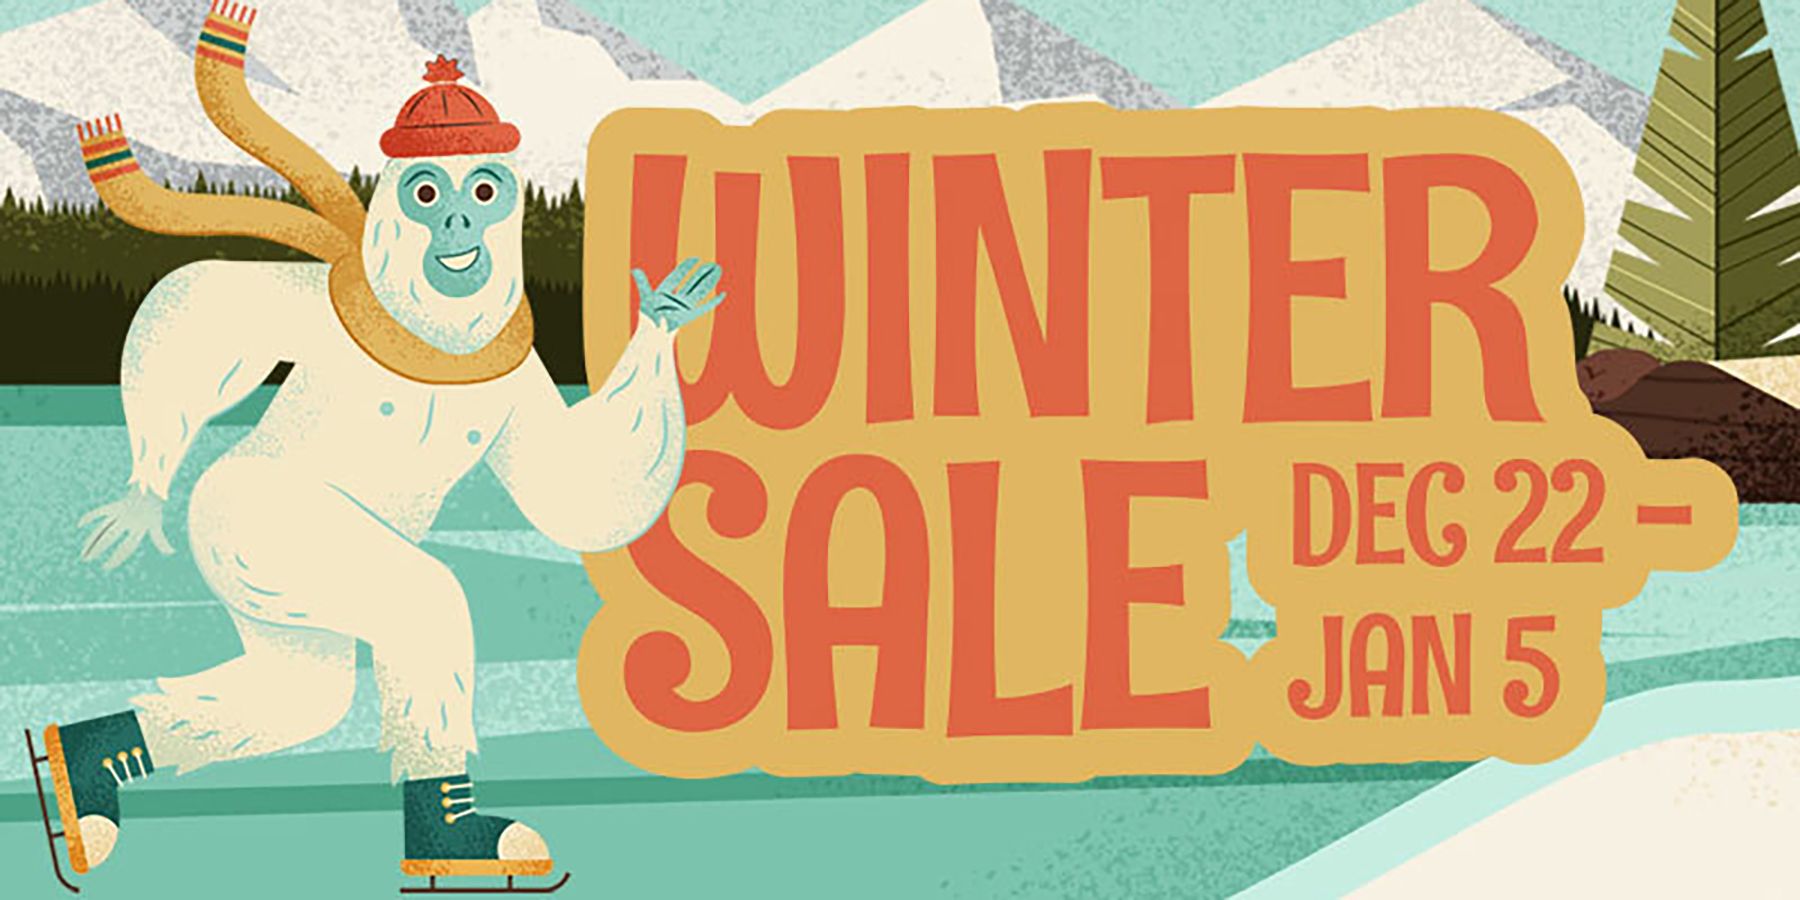 Best Deals and Highlights From the Steam Winter Sale